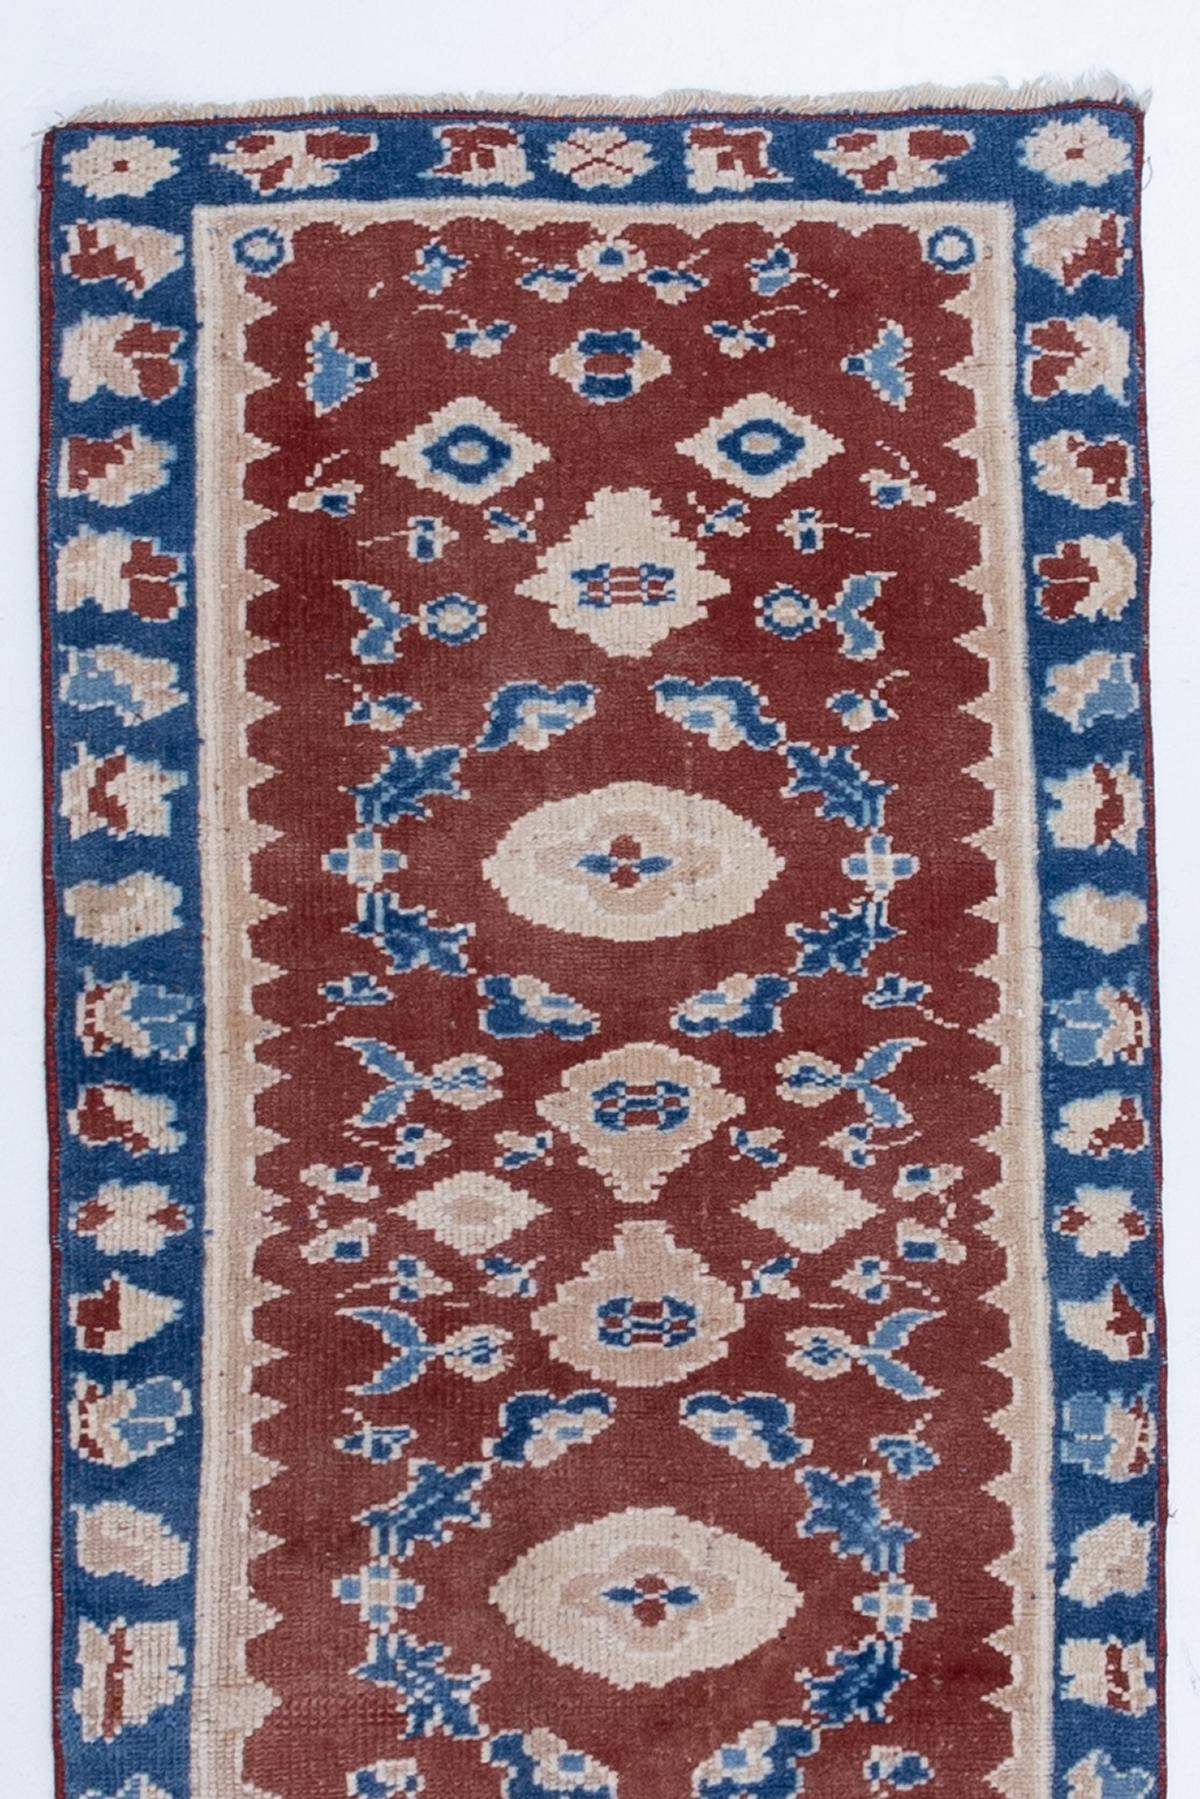  Vintage Turkish Oushak Runner Rug In Good Condition For Sale In West Palm Beach, FL